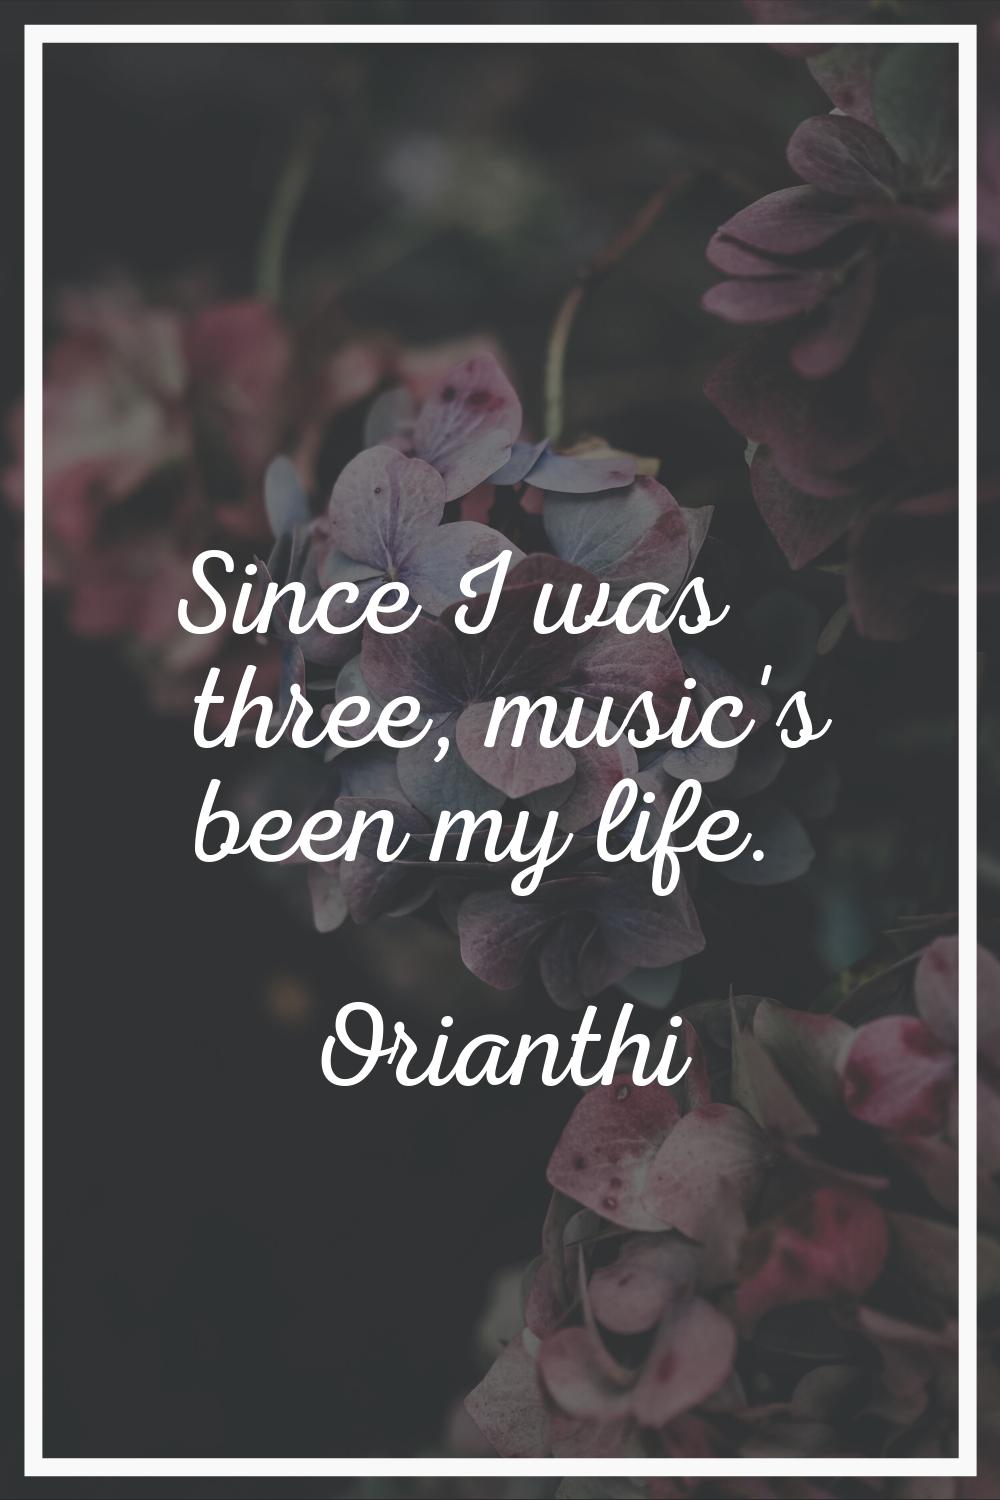 Since I was three, music's been my life.